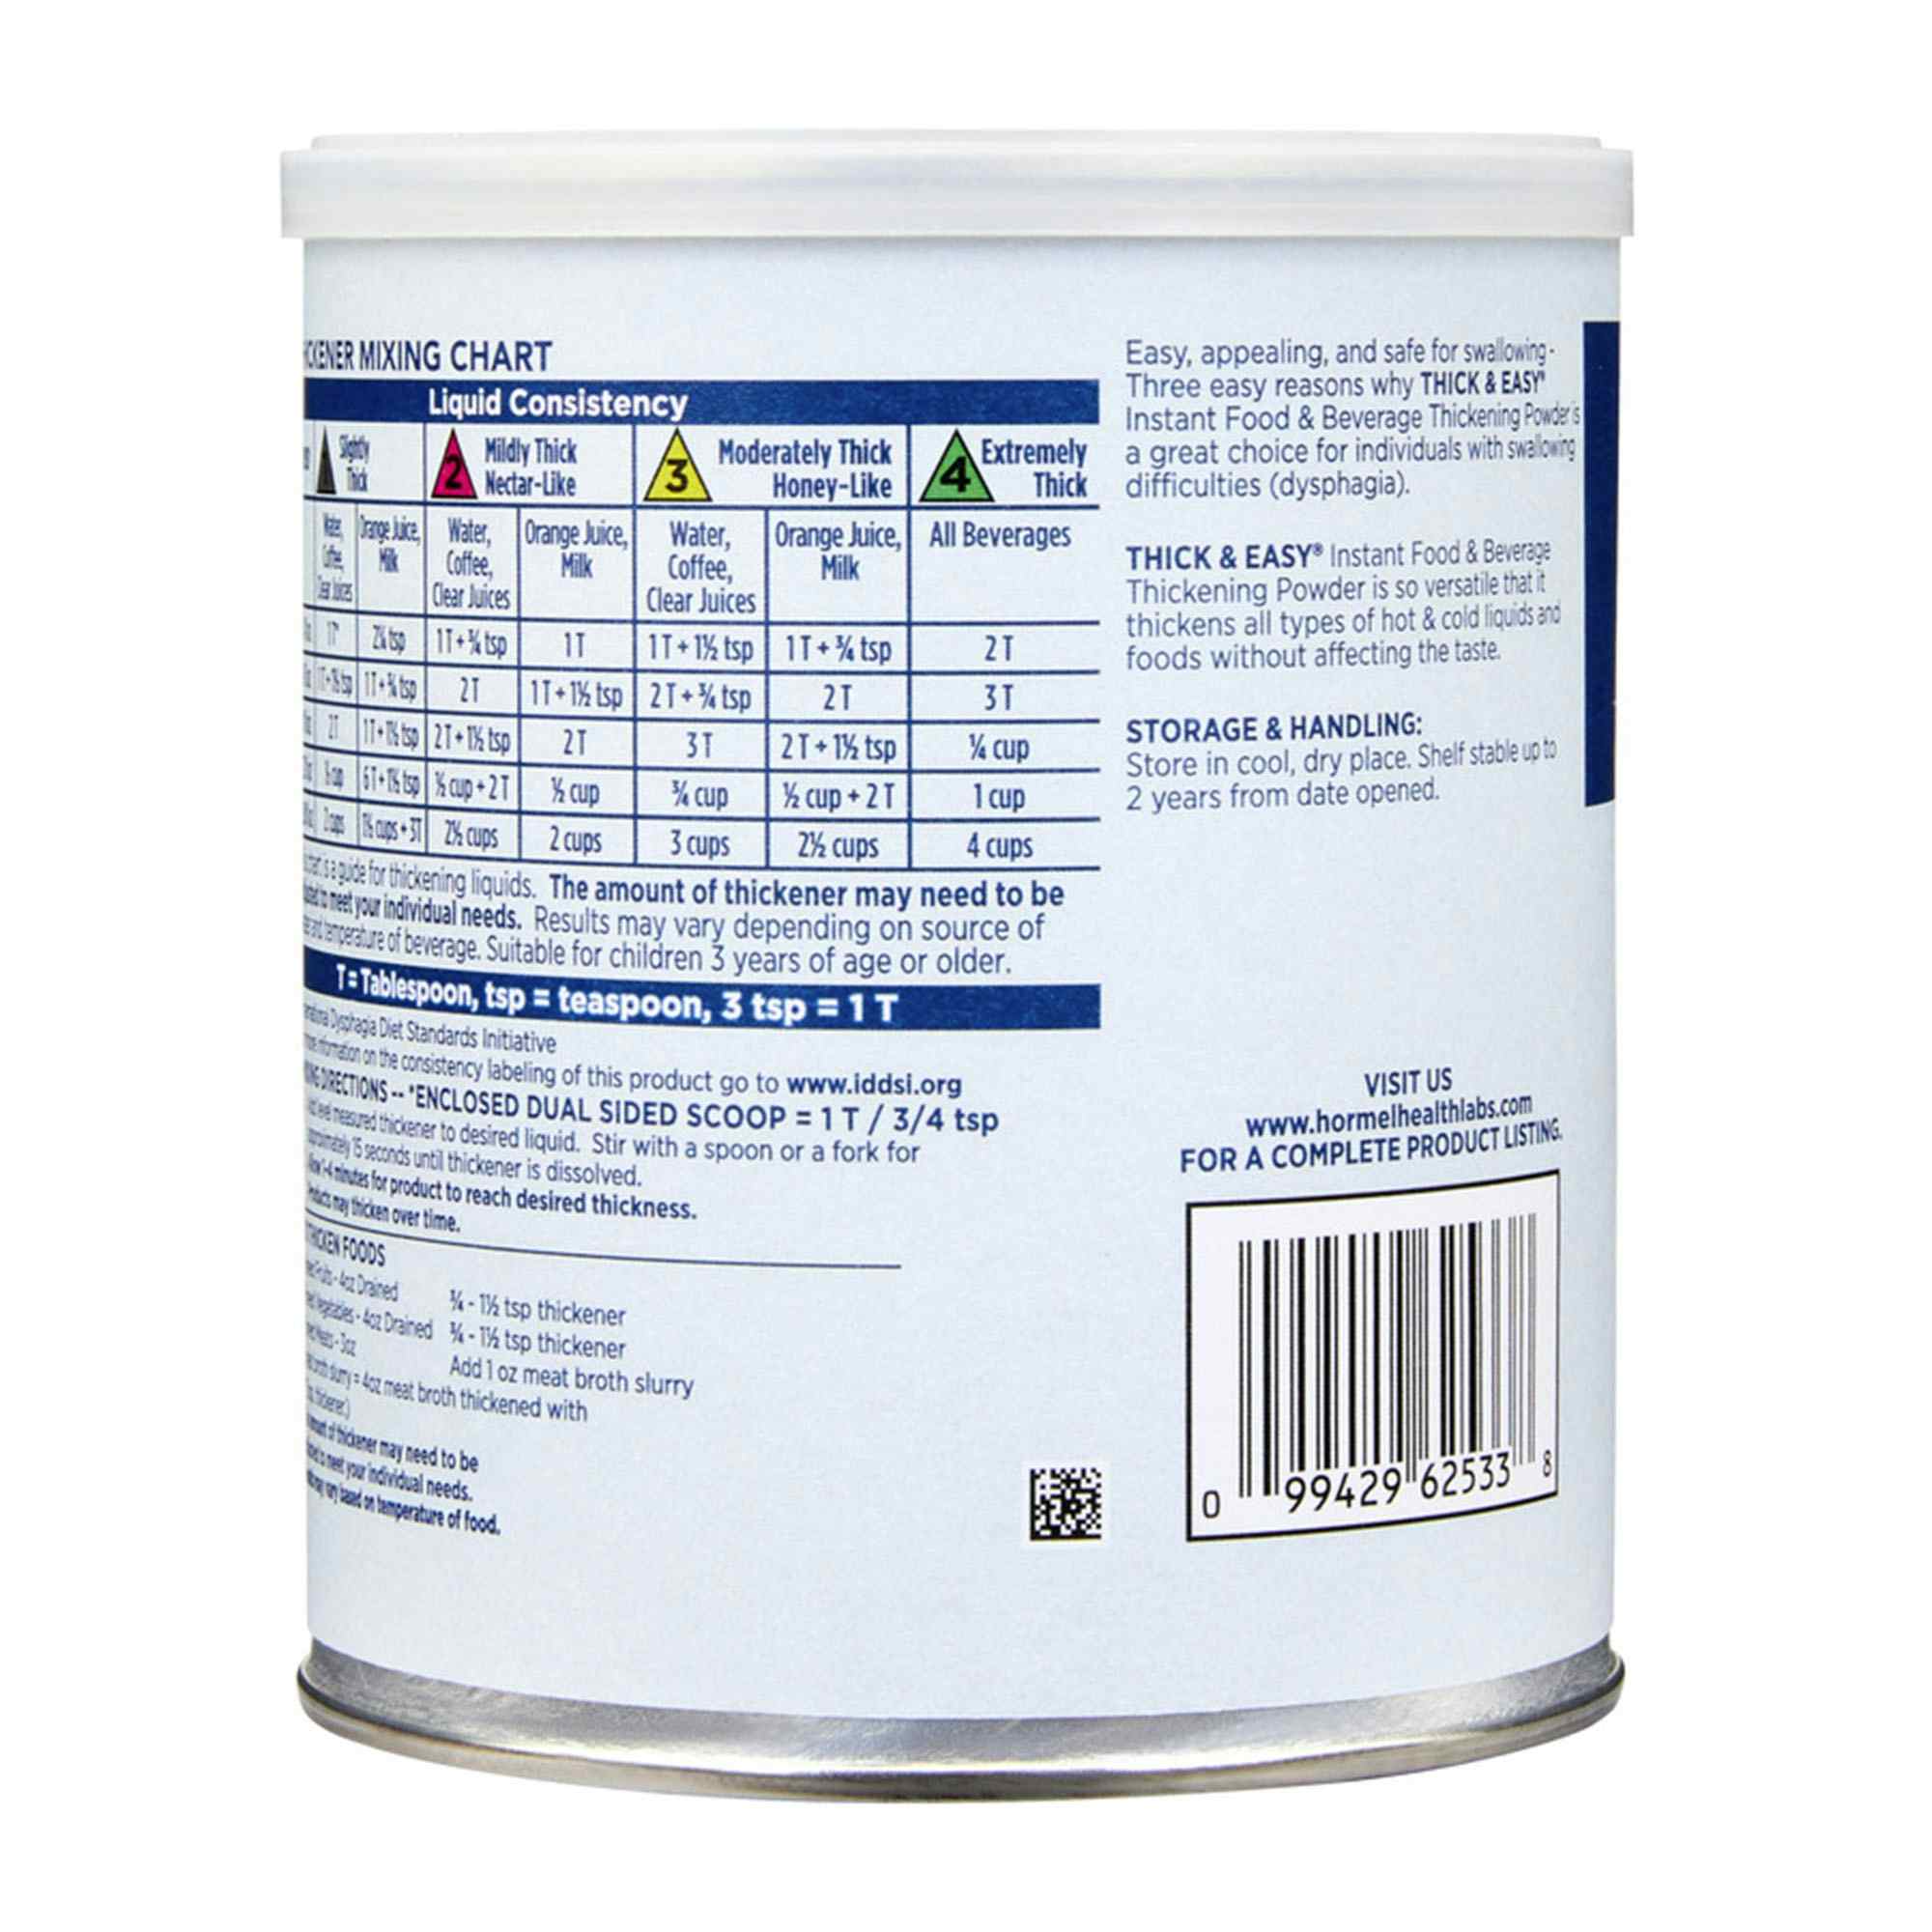 Thick & Easy Food and Beverage Thickener, 8 oz. Canister Unflavored Powder